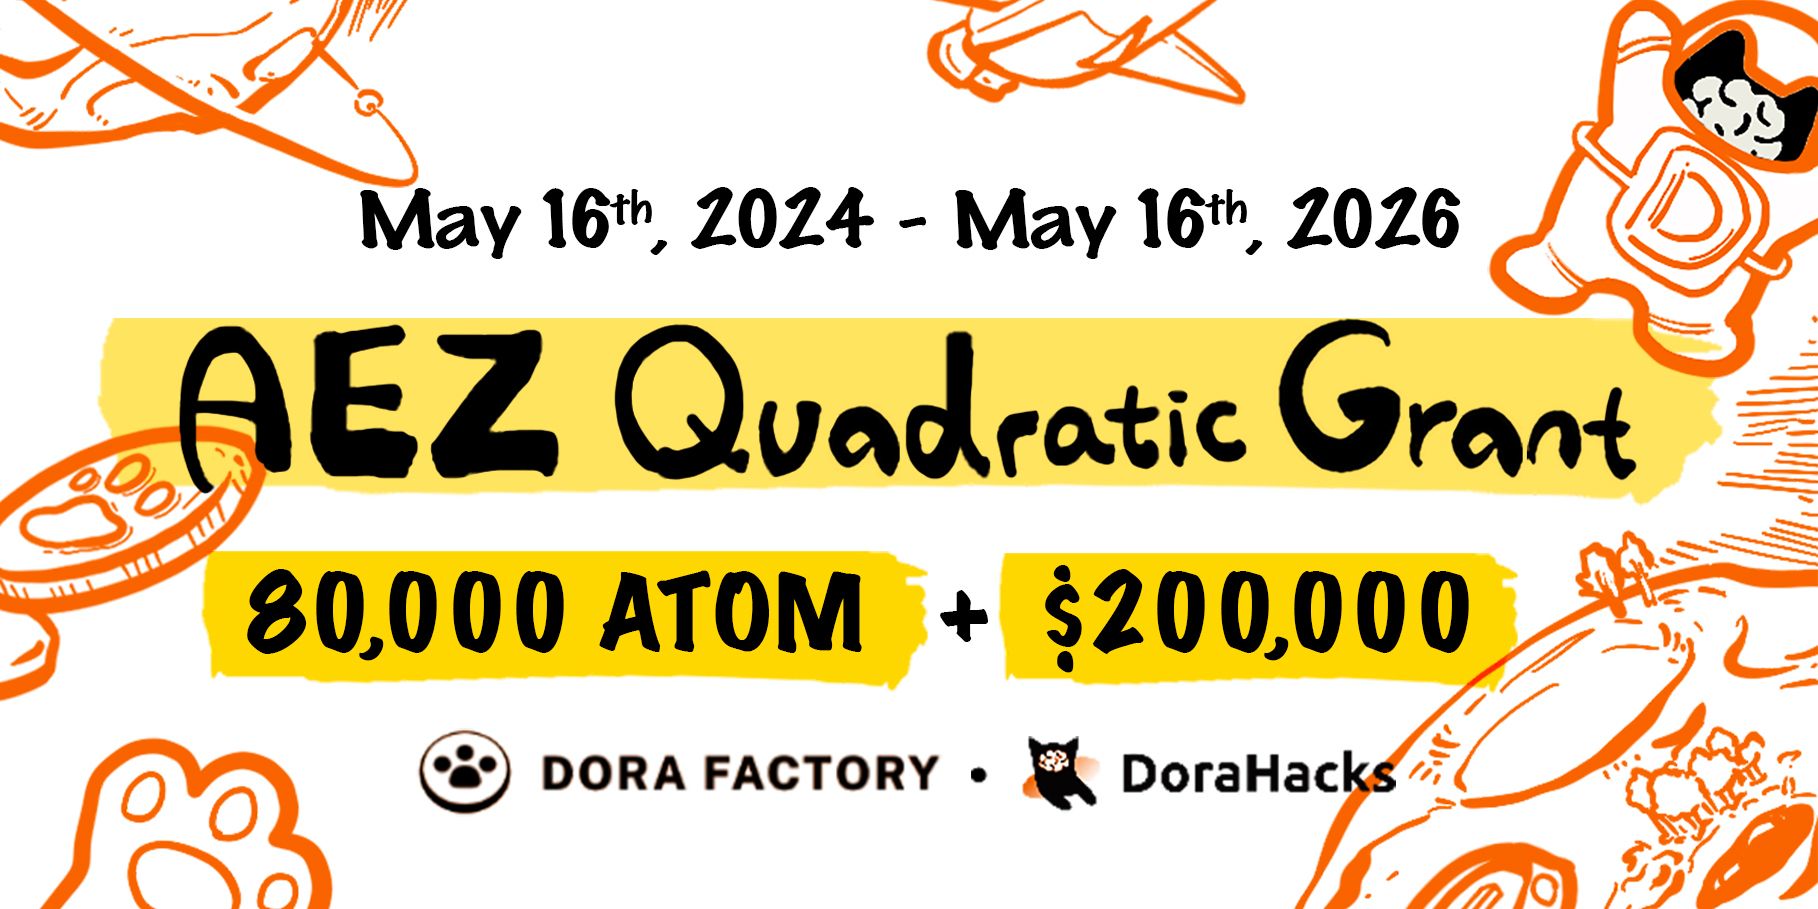 AEZ Quadratic Grant Kicks Off Round 2, With A Million Dollar Funding Secured from Cosmos Prop#917 and AADAO In the Next 24 Months